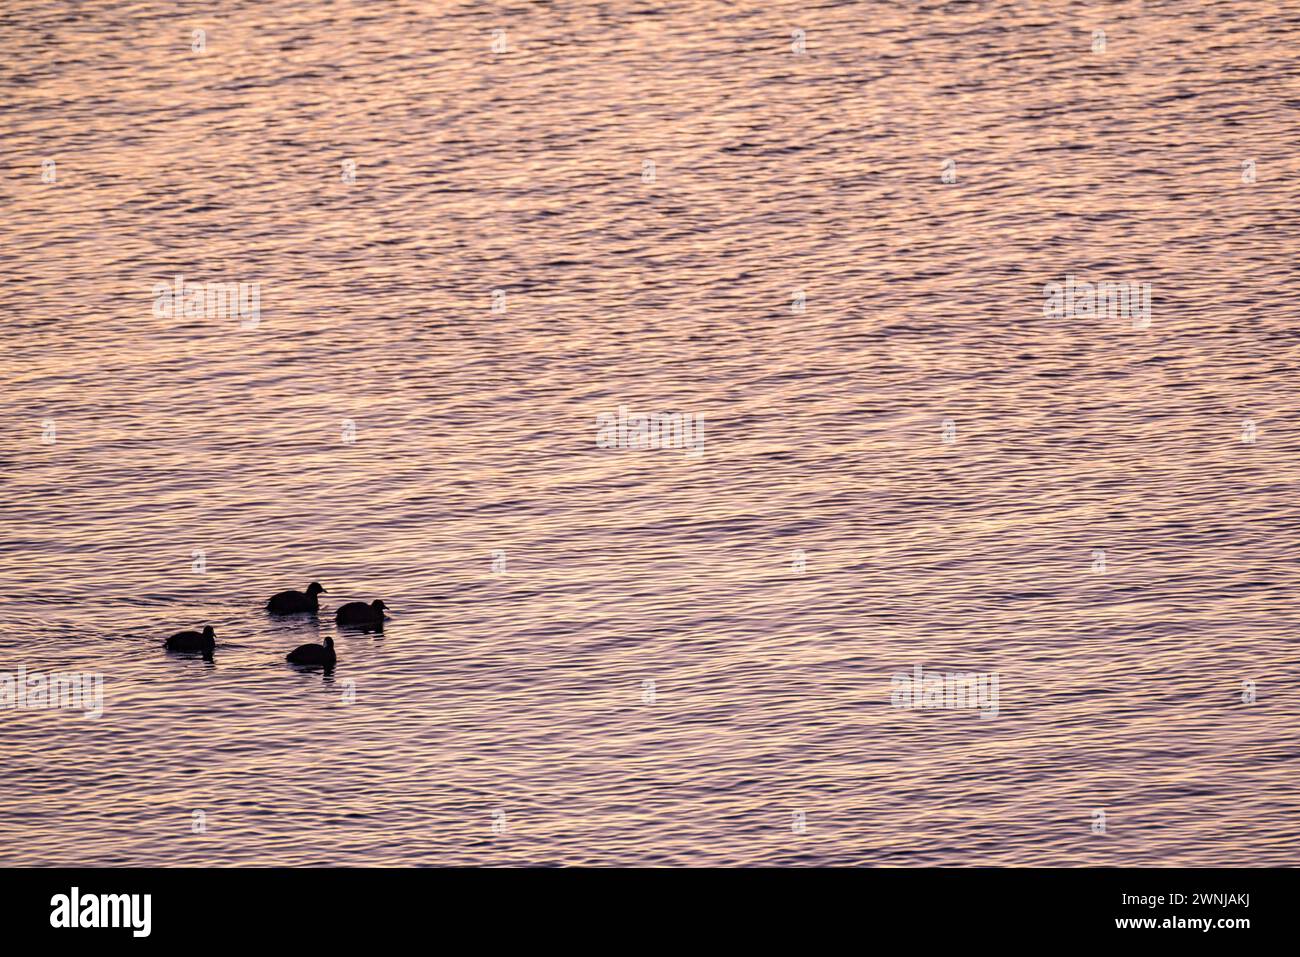 Some common coots (Fulica atra) at dawn in the Ebro river seen from the Zigurat viewpoint, at the mouth of the Ebro River. Tarragona, Catalonia, Spain Stock Photo